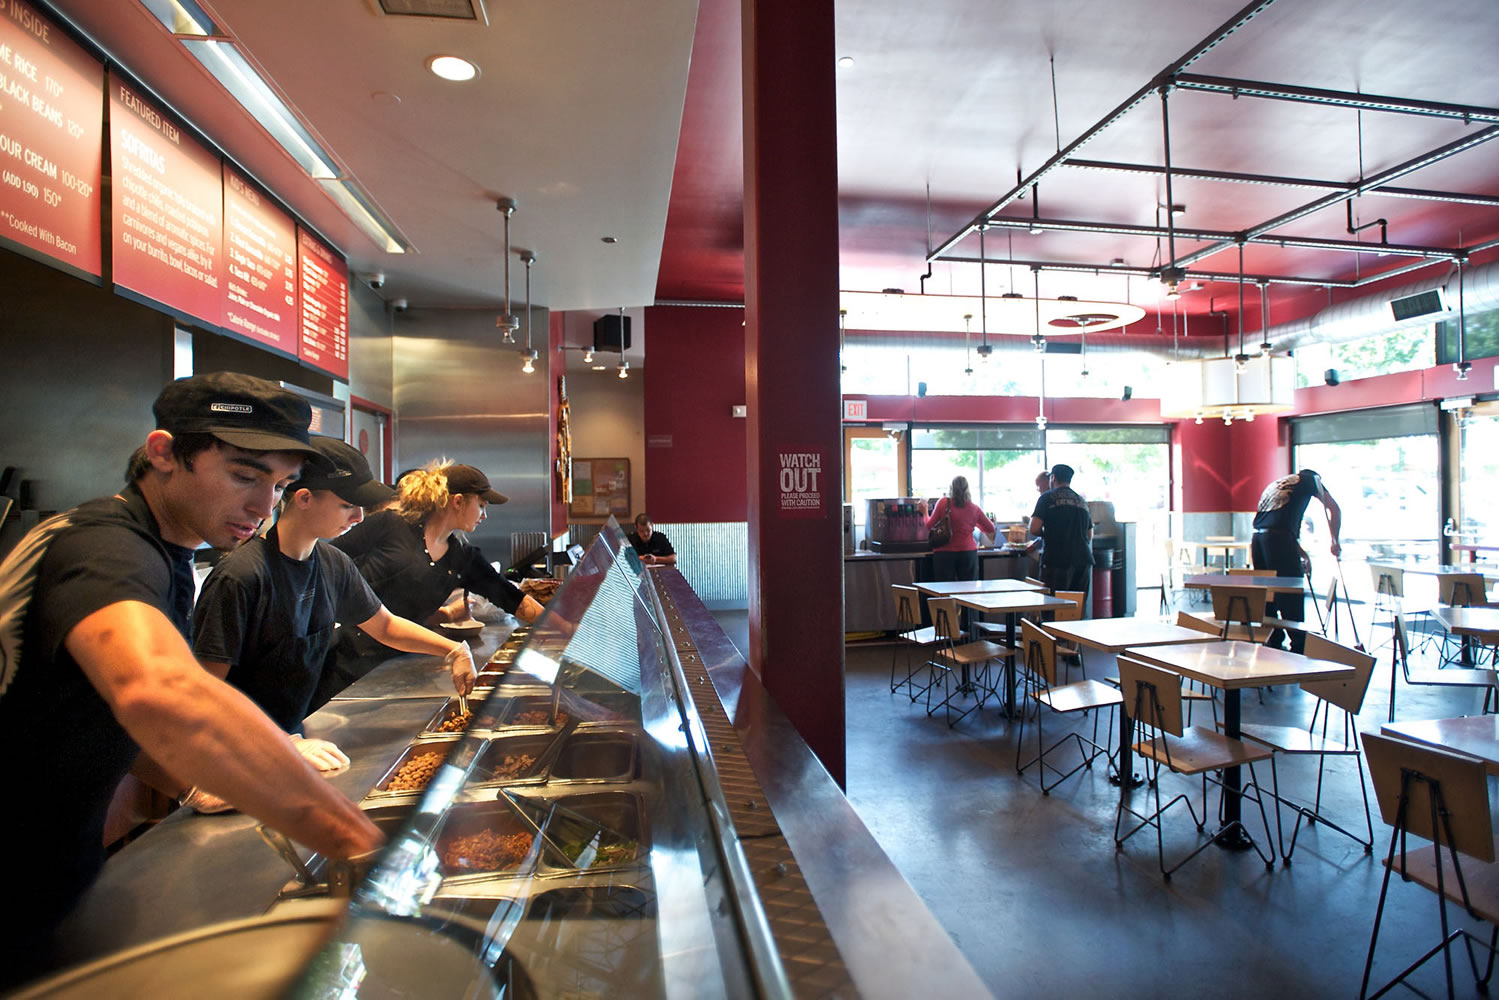 Vincent Mendez, left, and his colleagues get ready to serve the lunch crowd Tuesday at Chipotle Mexican Grill in east Vancouver.